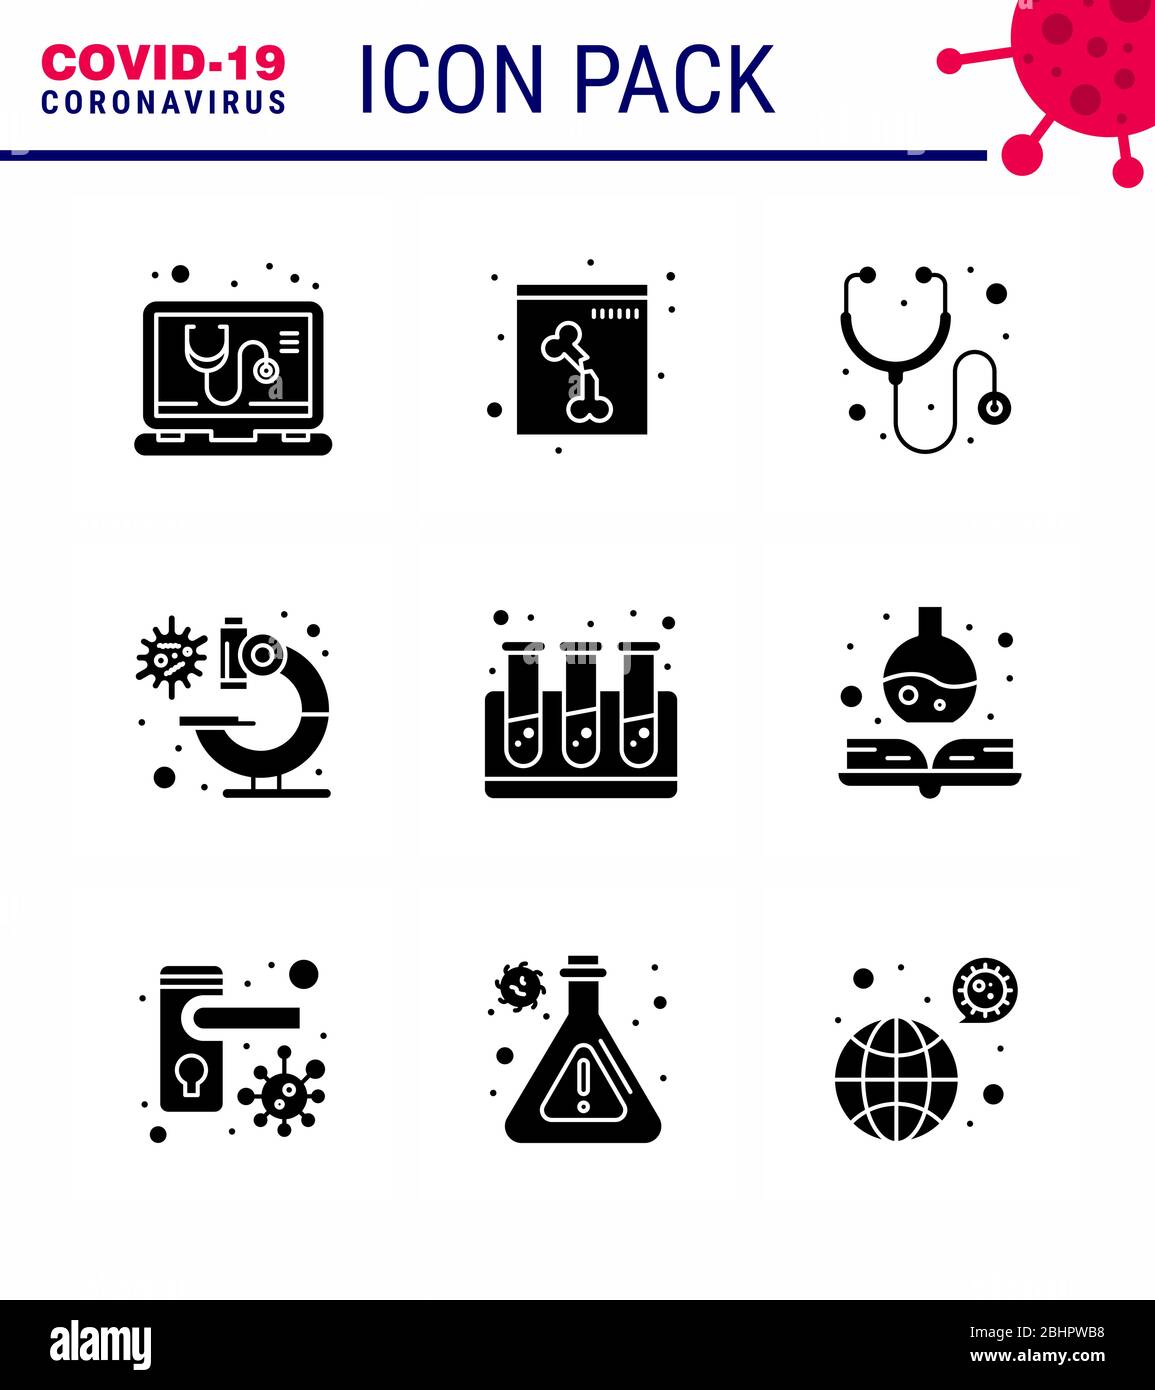 Coronavirus Precaution Tips icon for healthcare guidelines presentation 9 Solid Glyph Black icon pack such as  handbook, test, medical, blood, microsc Stock Vector